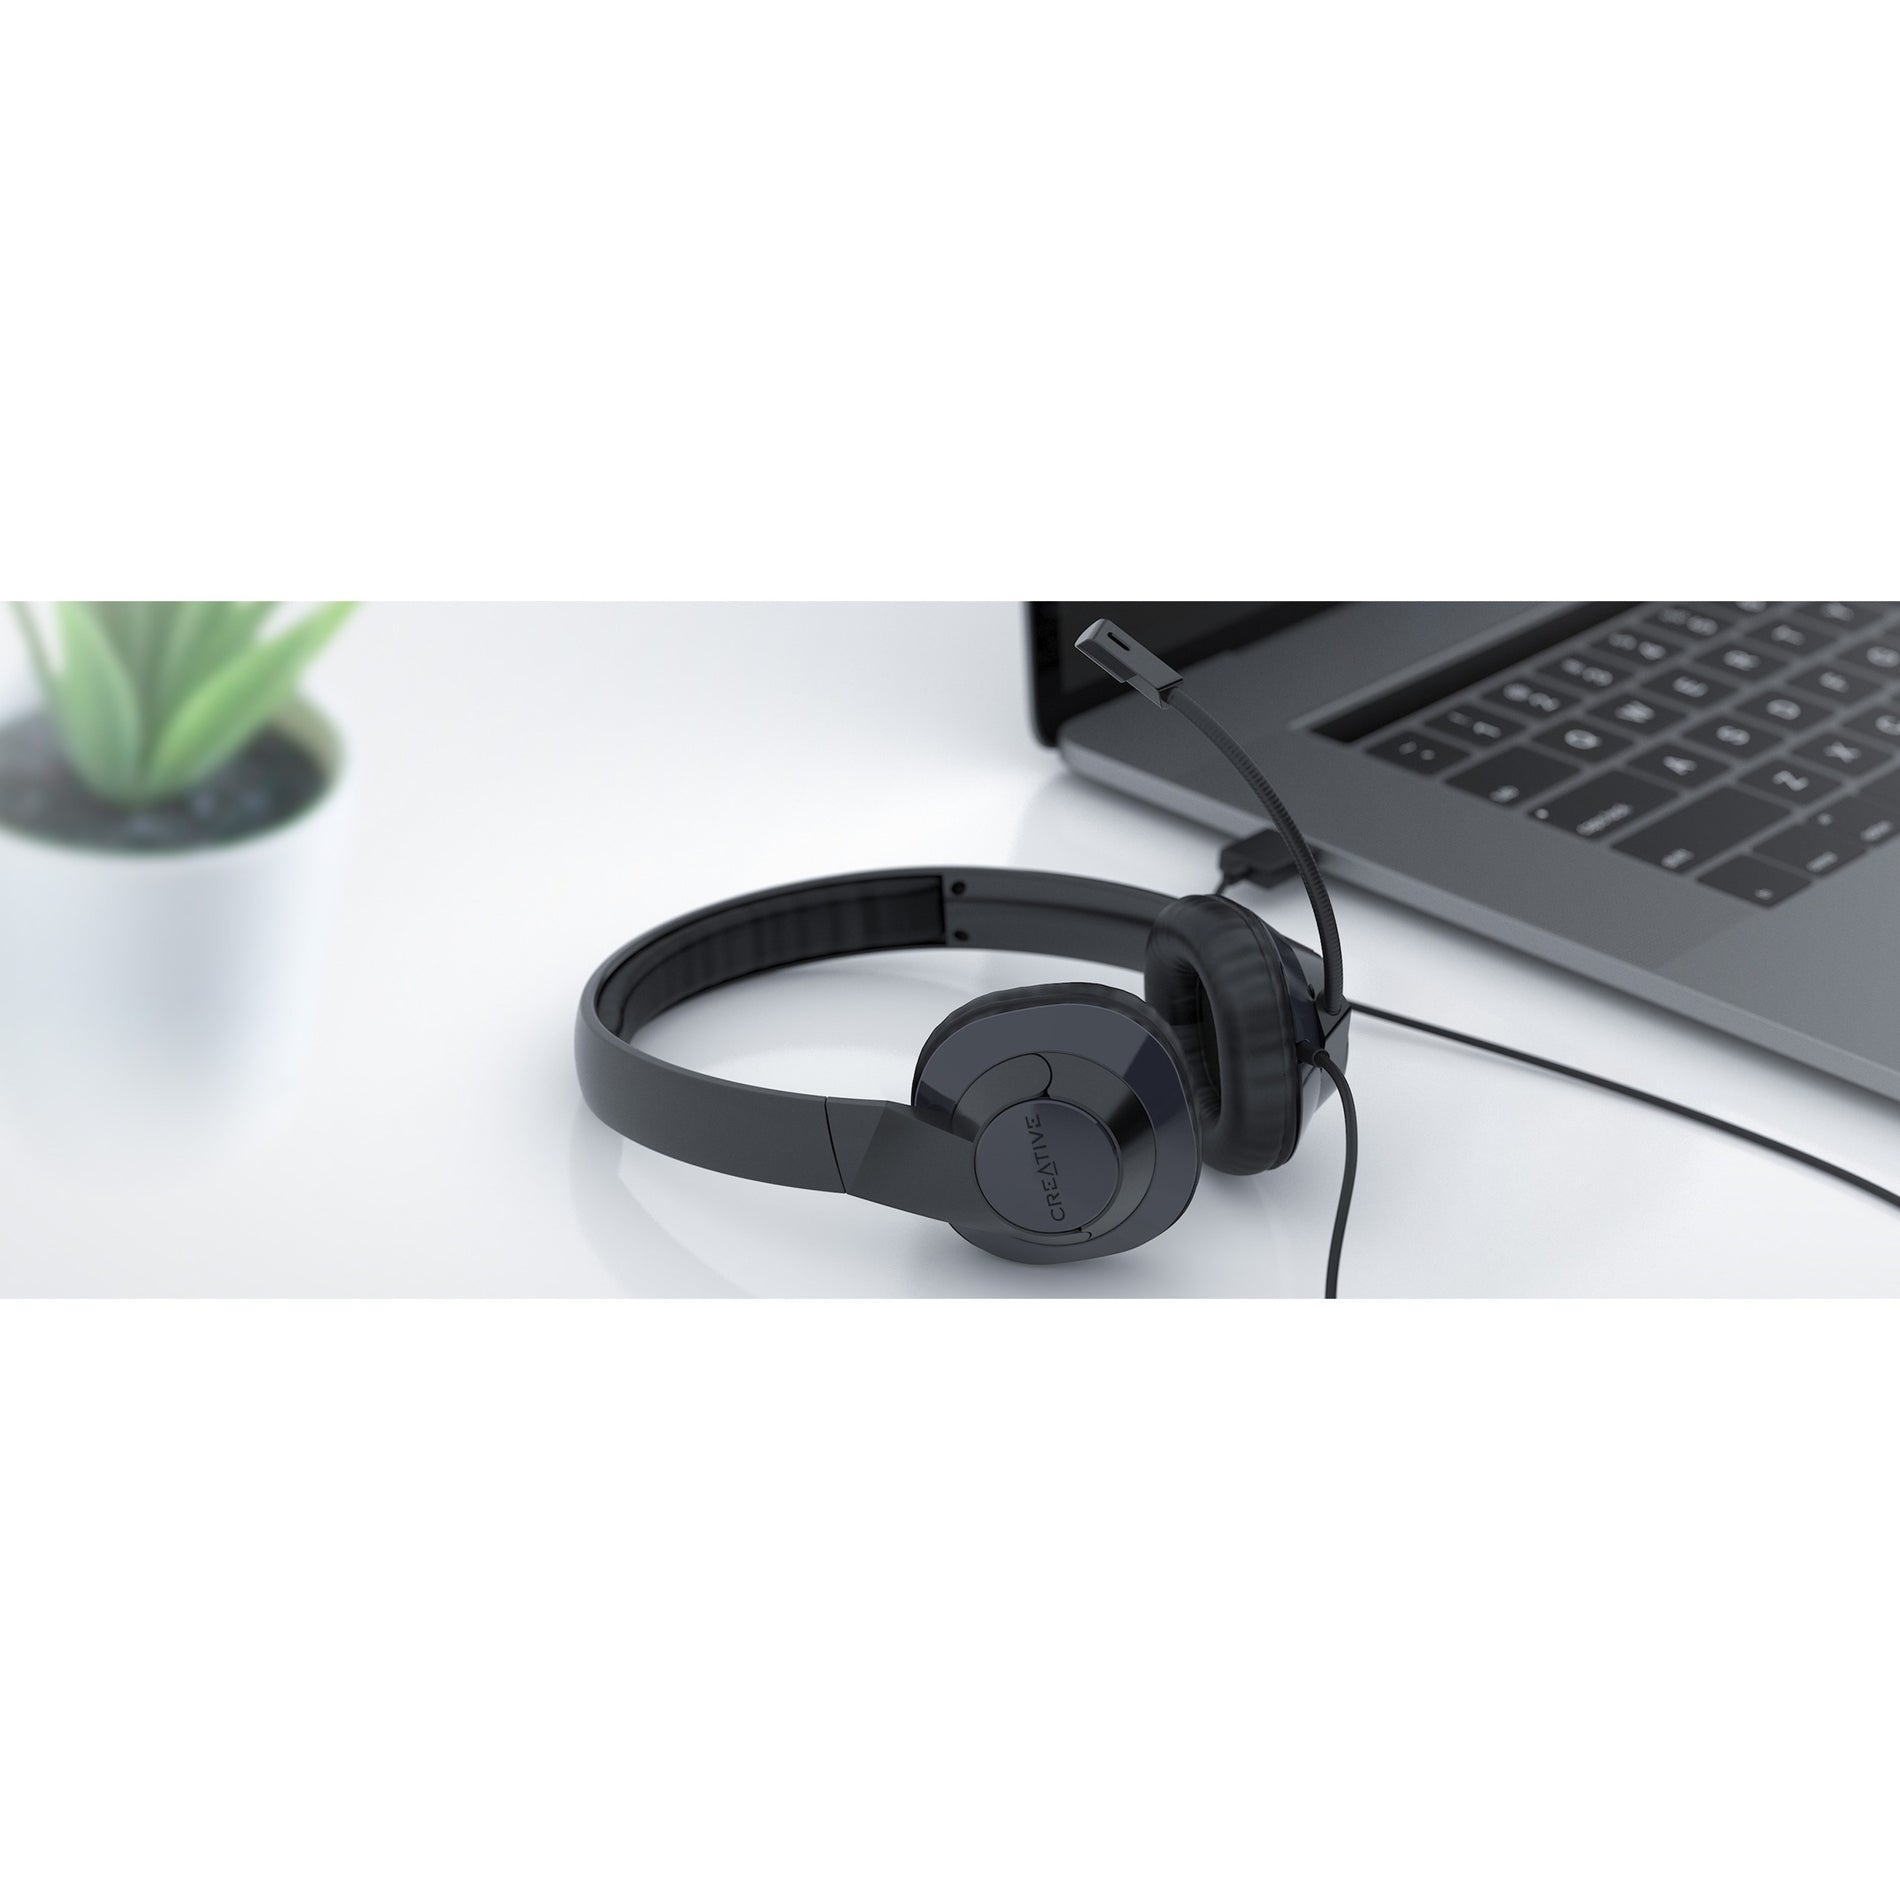 Creative 51EF0960AA000 HS-720 V2 Headset, USB On-ear Headset with Flexible Microphone, Noise Cancelling, Plug and Play